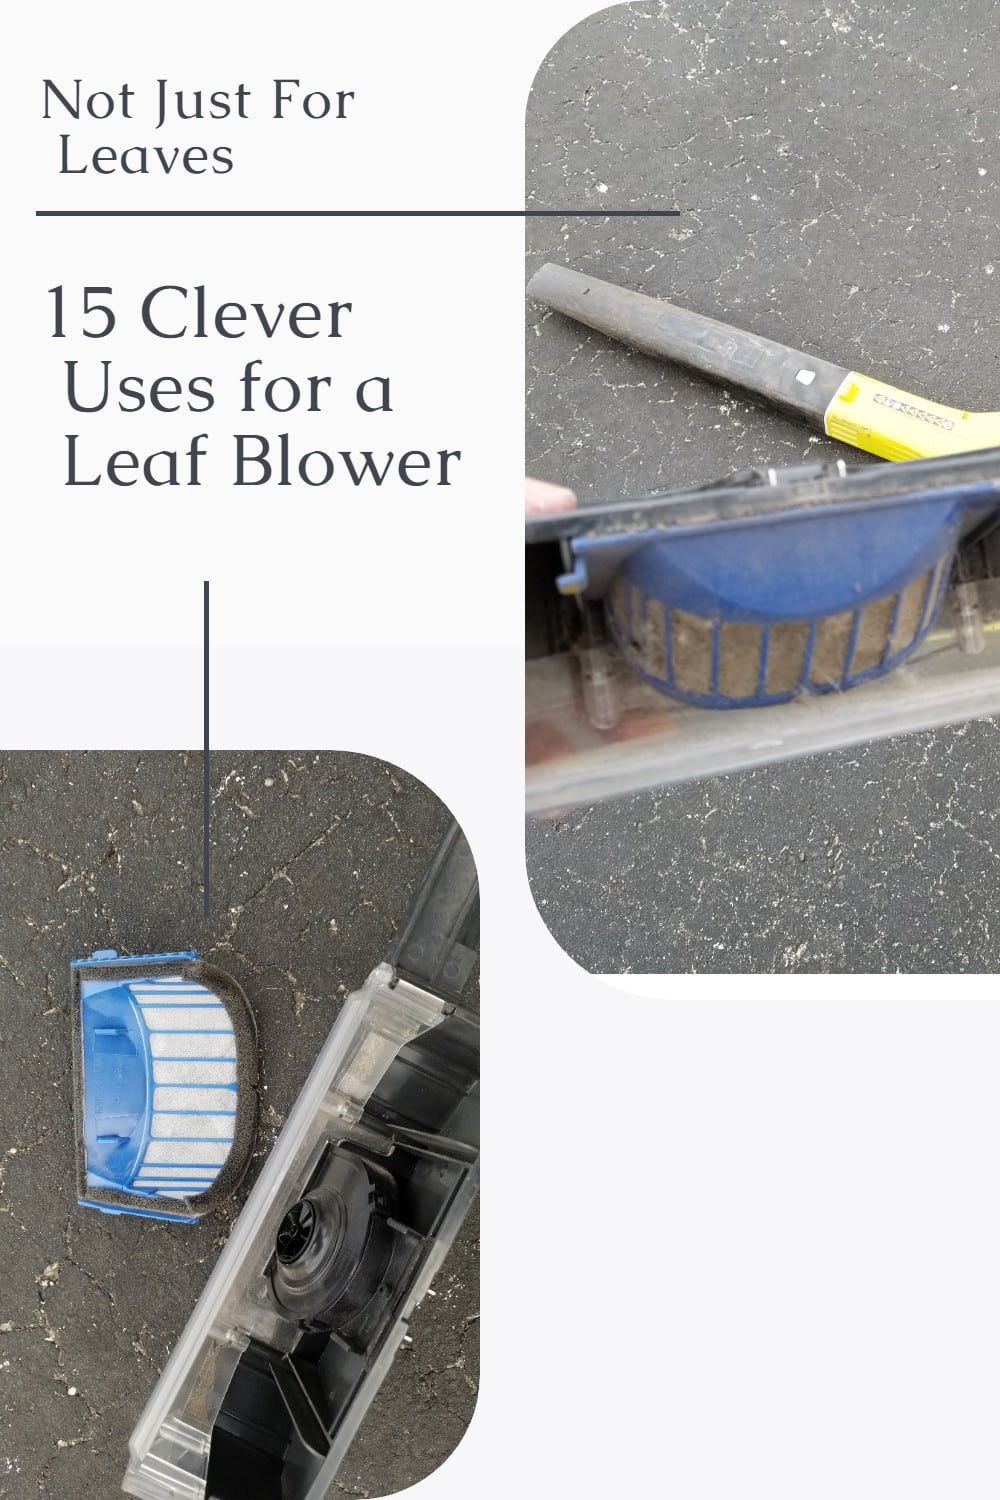 I love my battery operated leaf blower! In fact I have two. I keep one at home and the other lives in the camper. Leaf blowers, not just for leaves! See all my clever uses for leaf blowers in this fun article about all the ways to use a leaf blower. #MyRepurposedLife via @repurposedlife